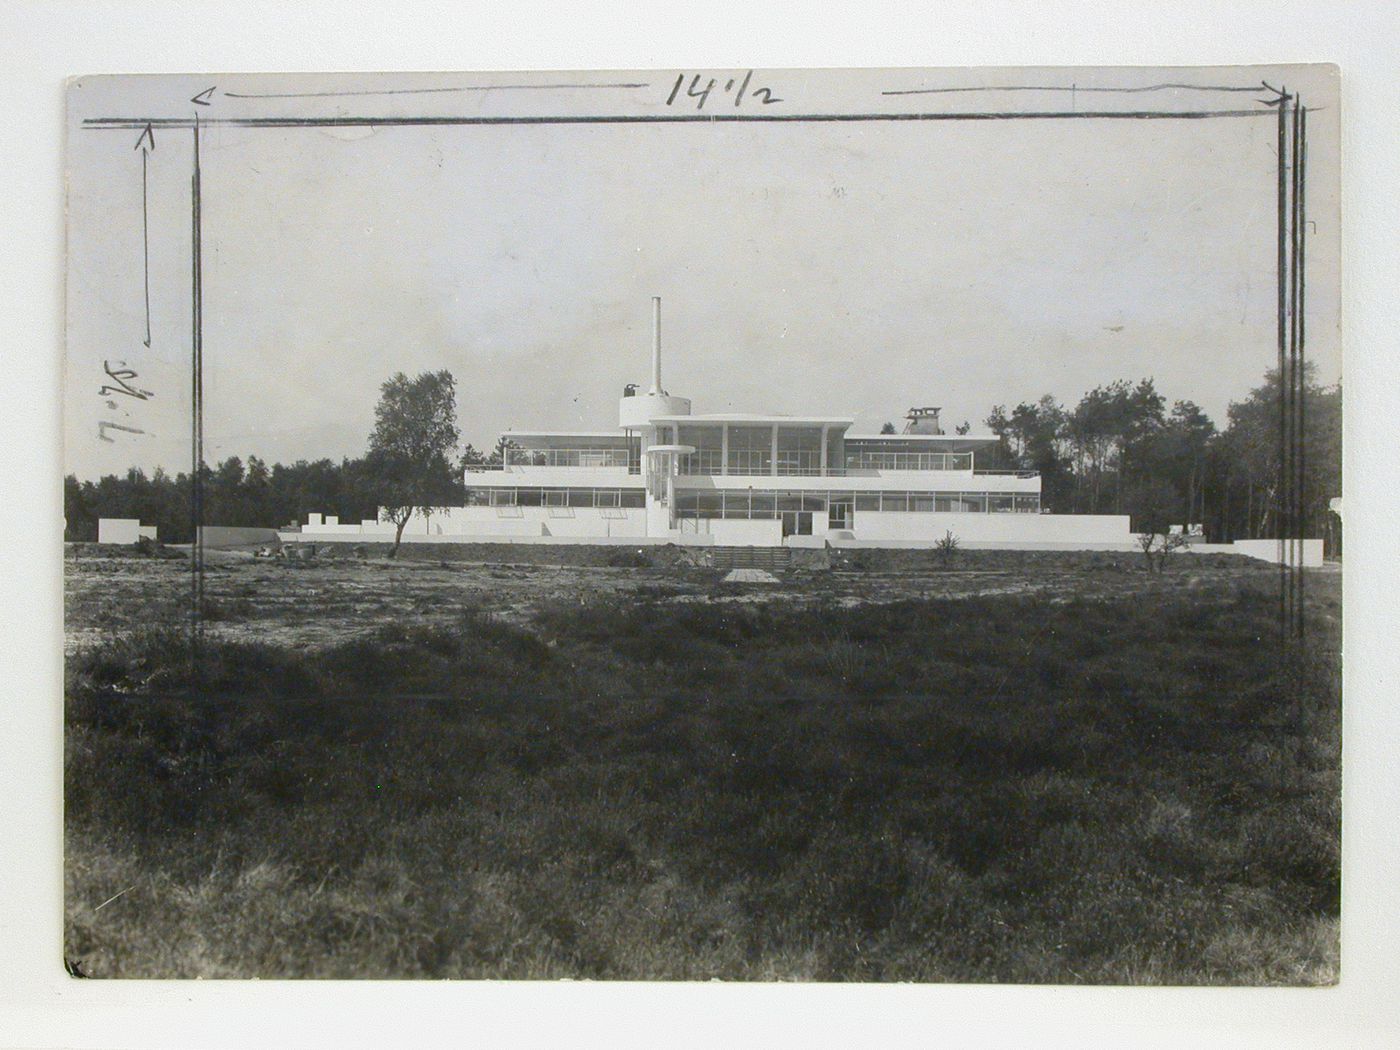 View of the south façade of the North Block of the Zonnestraal Sanatorium under construction, Loosdrechtse Bos 7, Hilversum, Netherlands